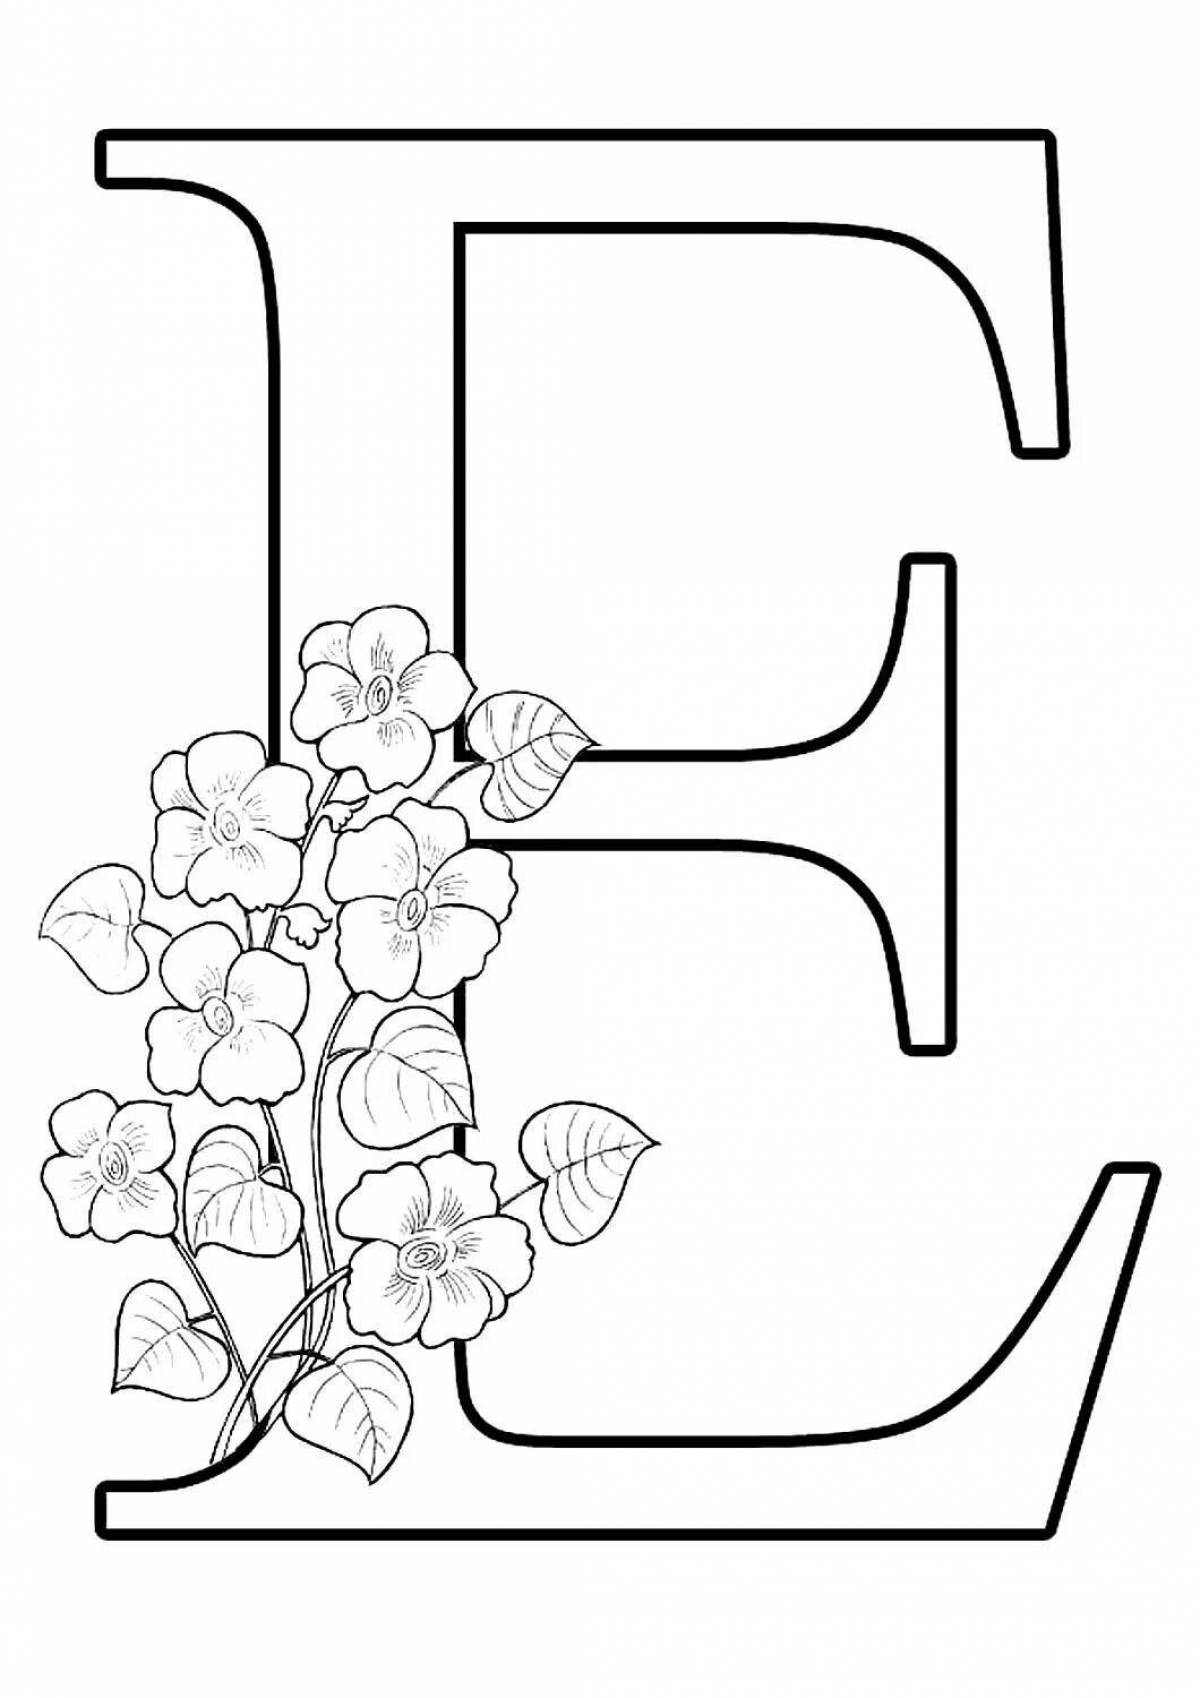 Gorgeous letter c with flowers